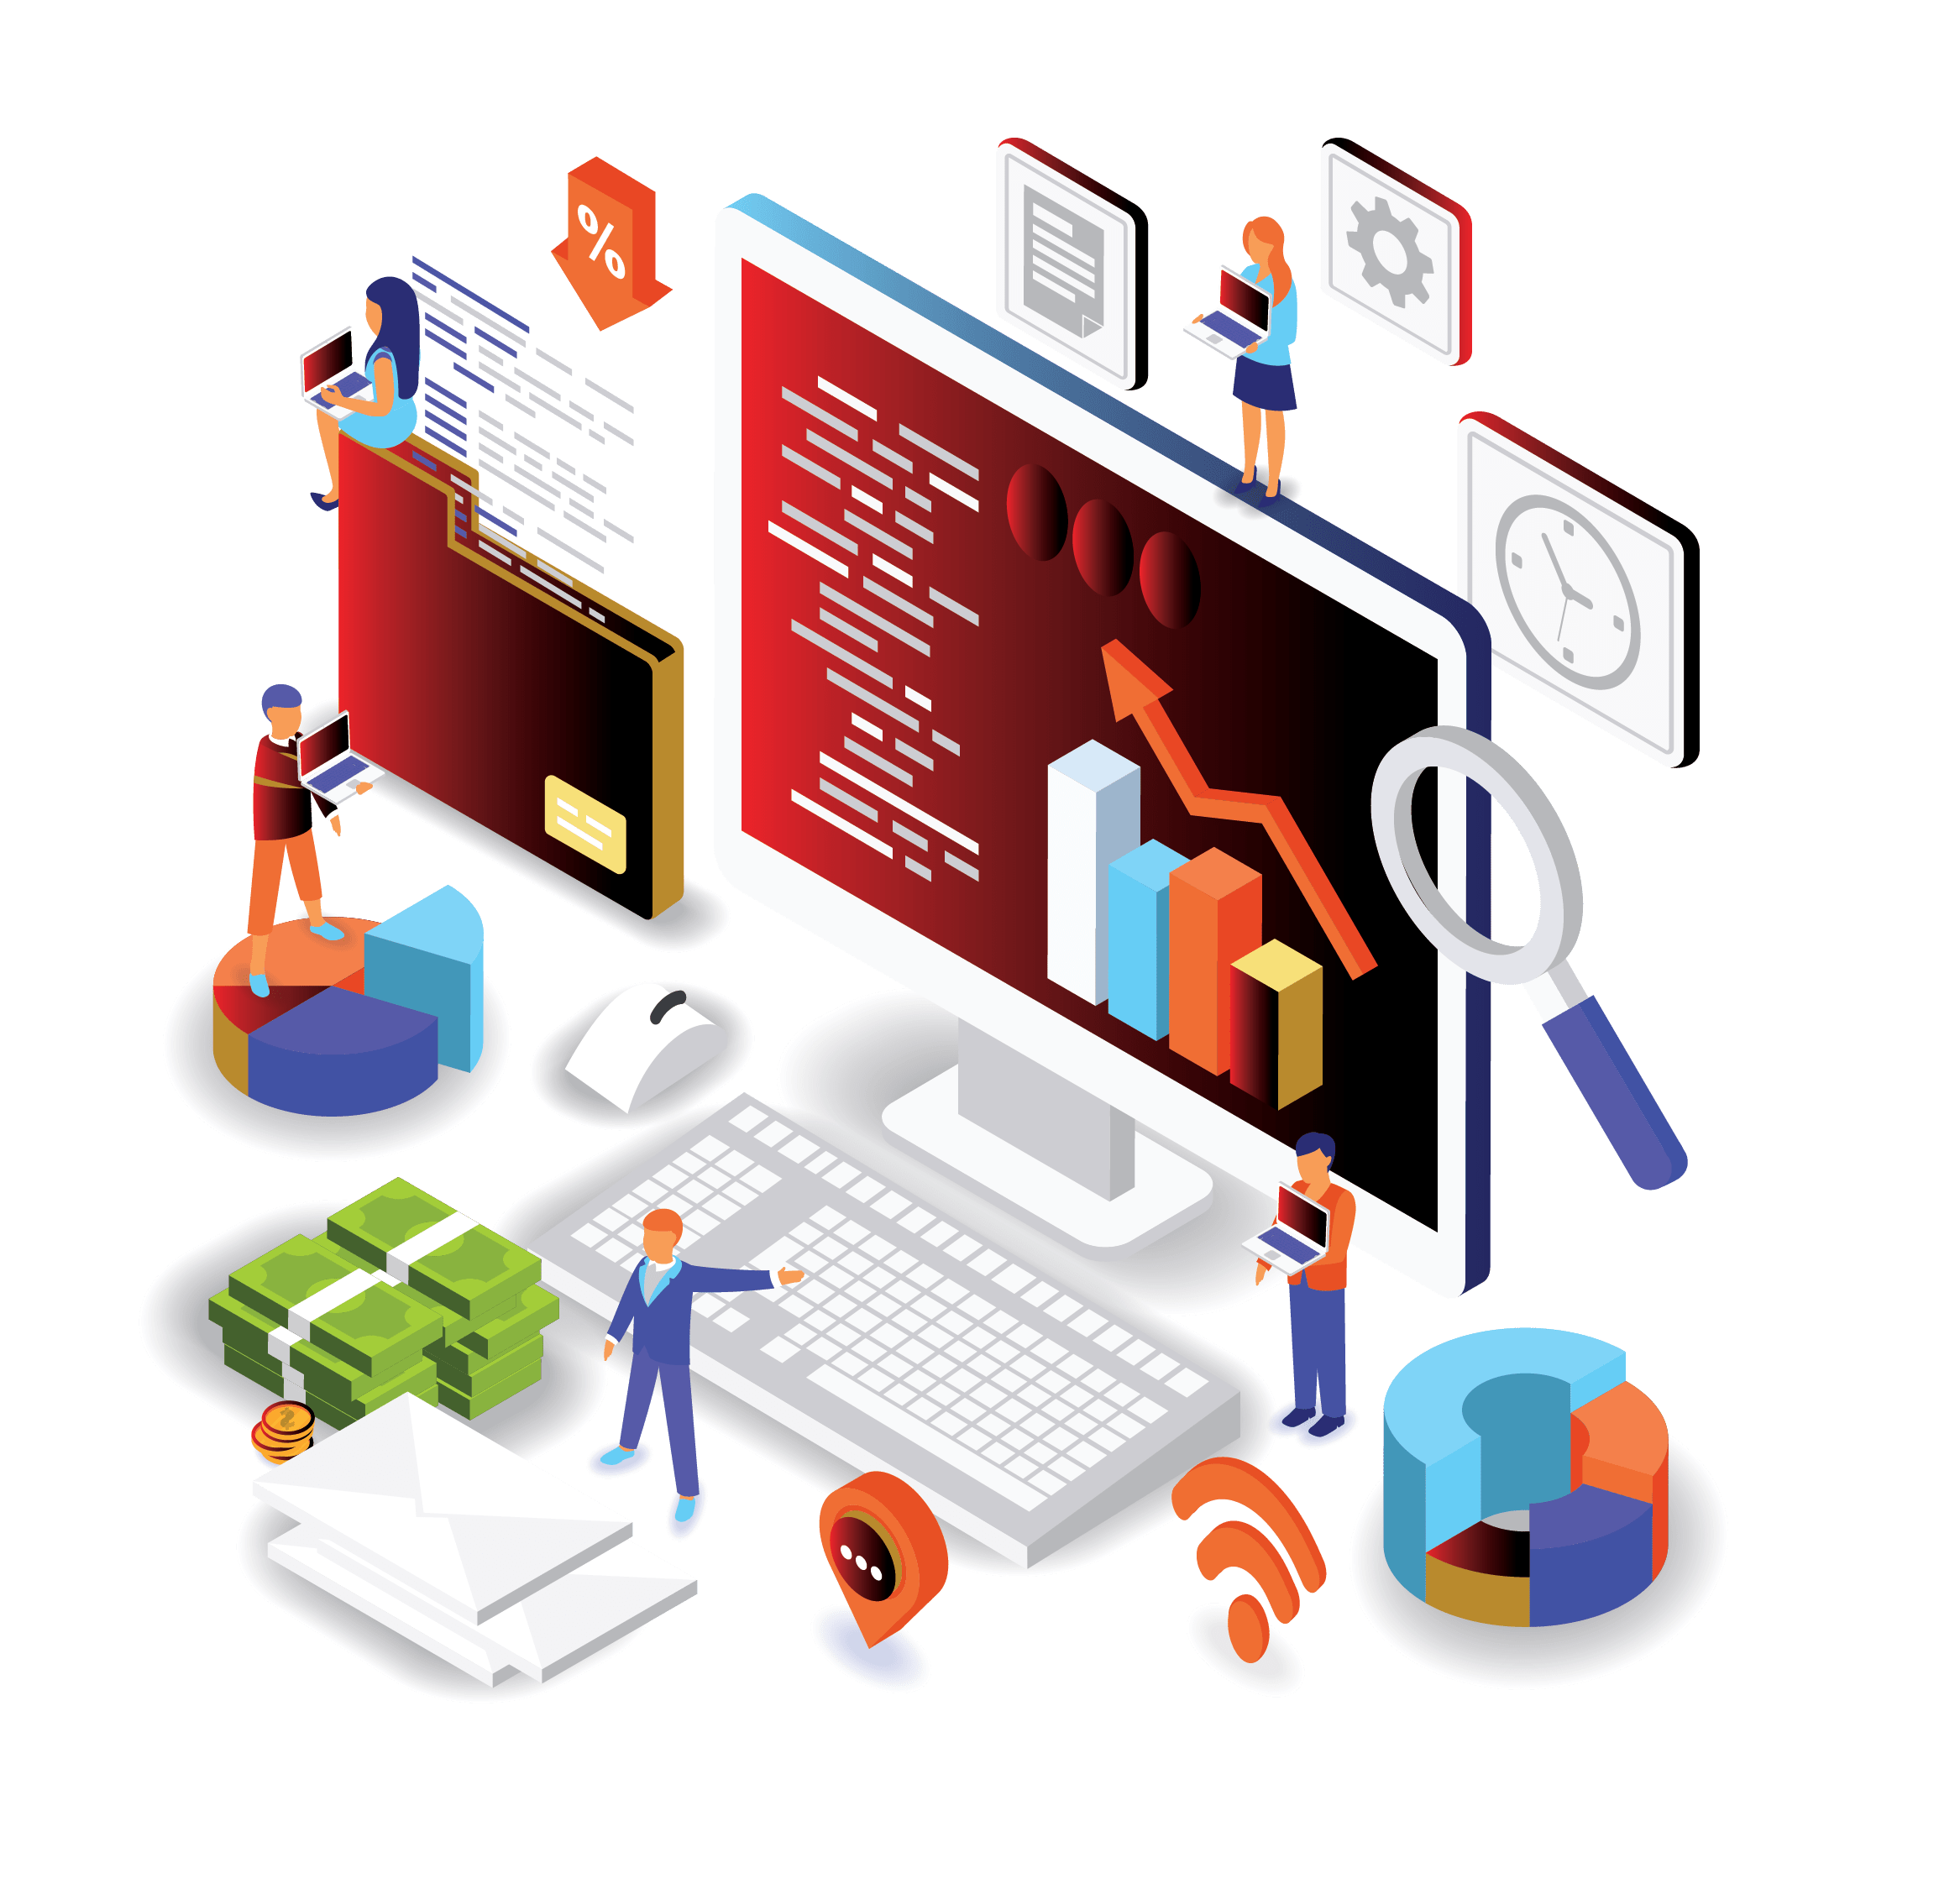 llustration of a laptop and various digital marketing icons representing digital marketing services provider.